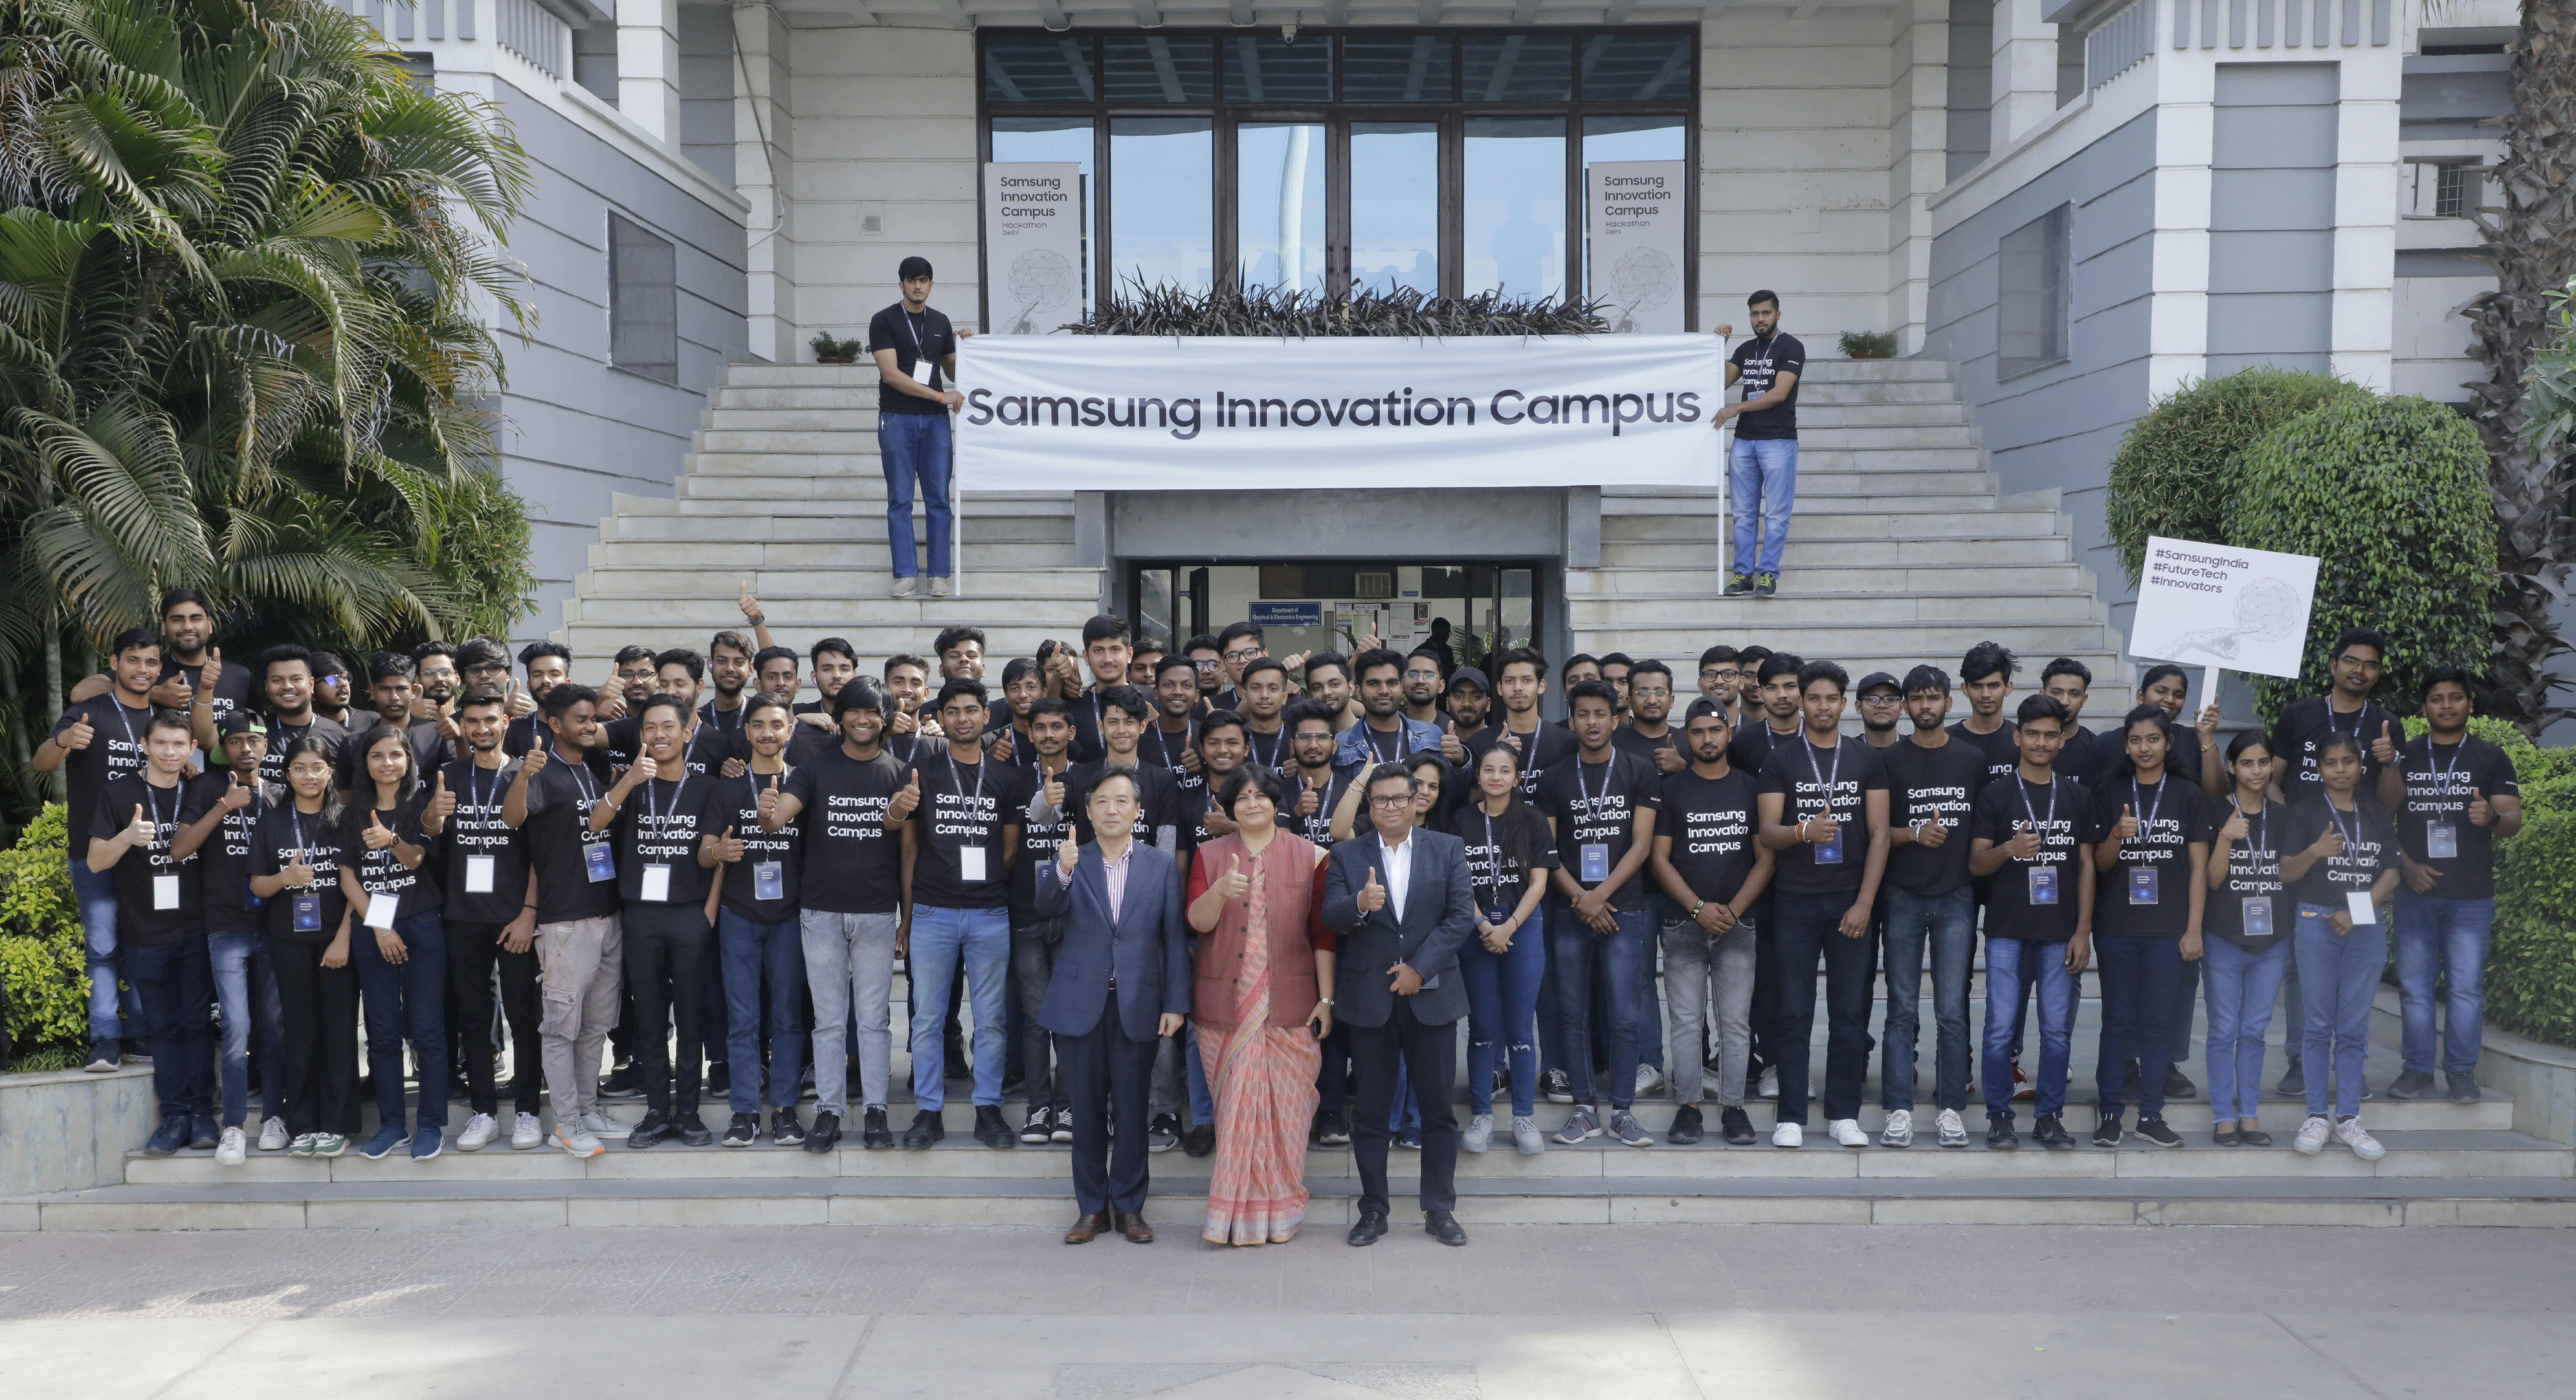 First Students' Batch of ‘Samsung Innovation Campus’ in Delhi Graduate with Certificates in Coding, Programming & IoT; Flagship CSR Program Aims to Make Students Job-Ready with Future Tech Skills